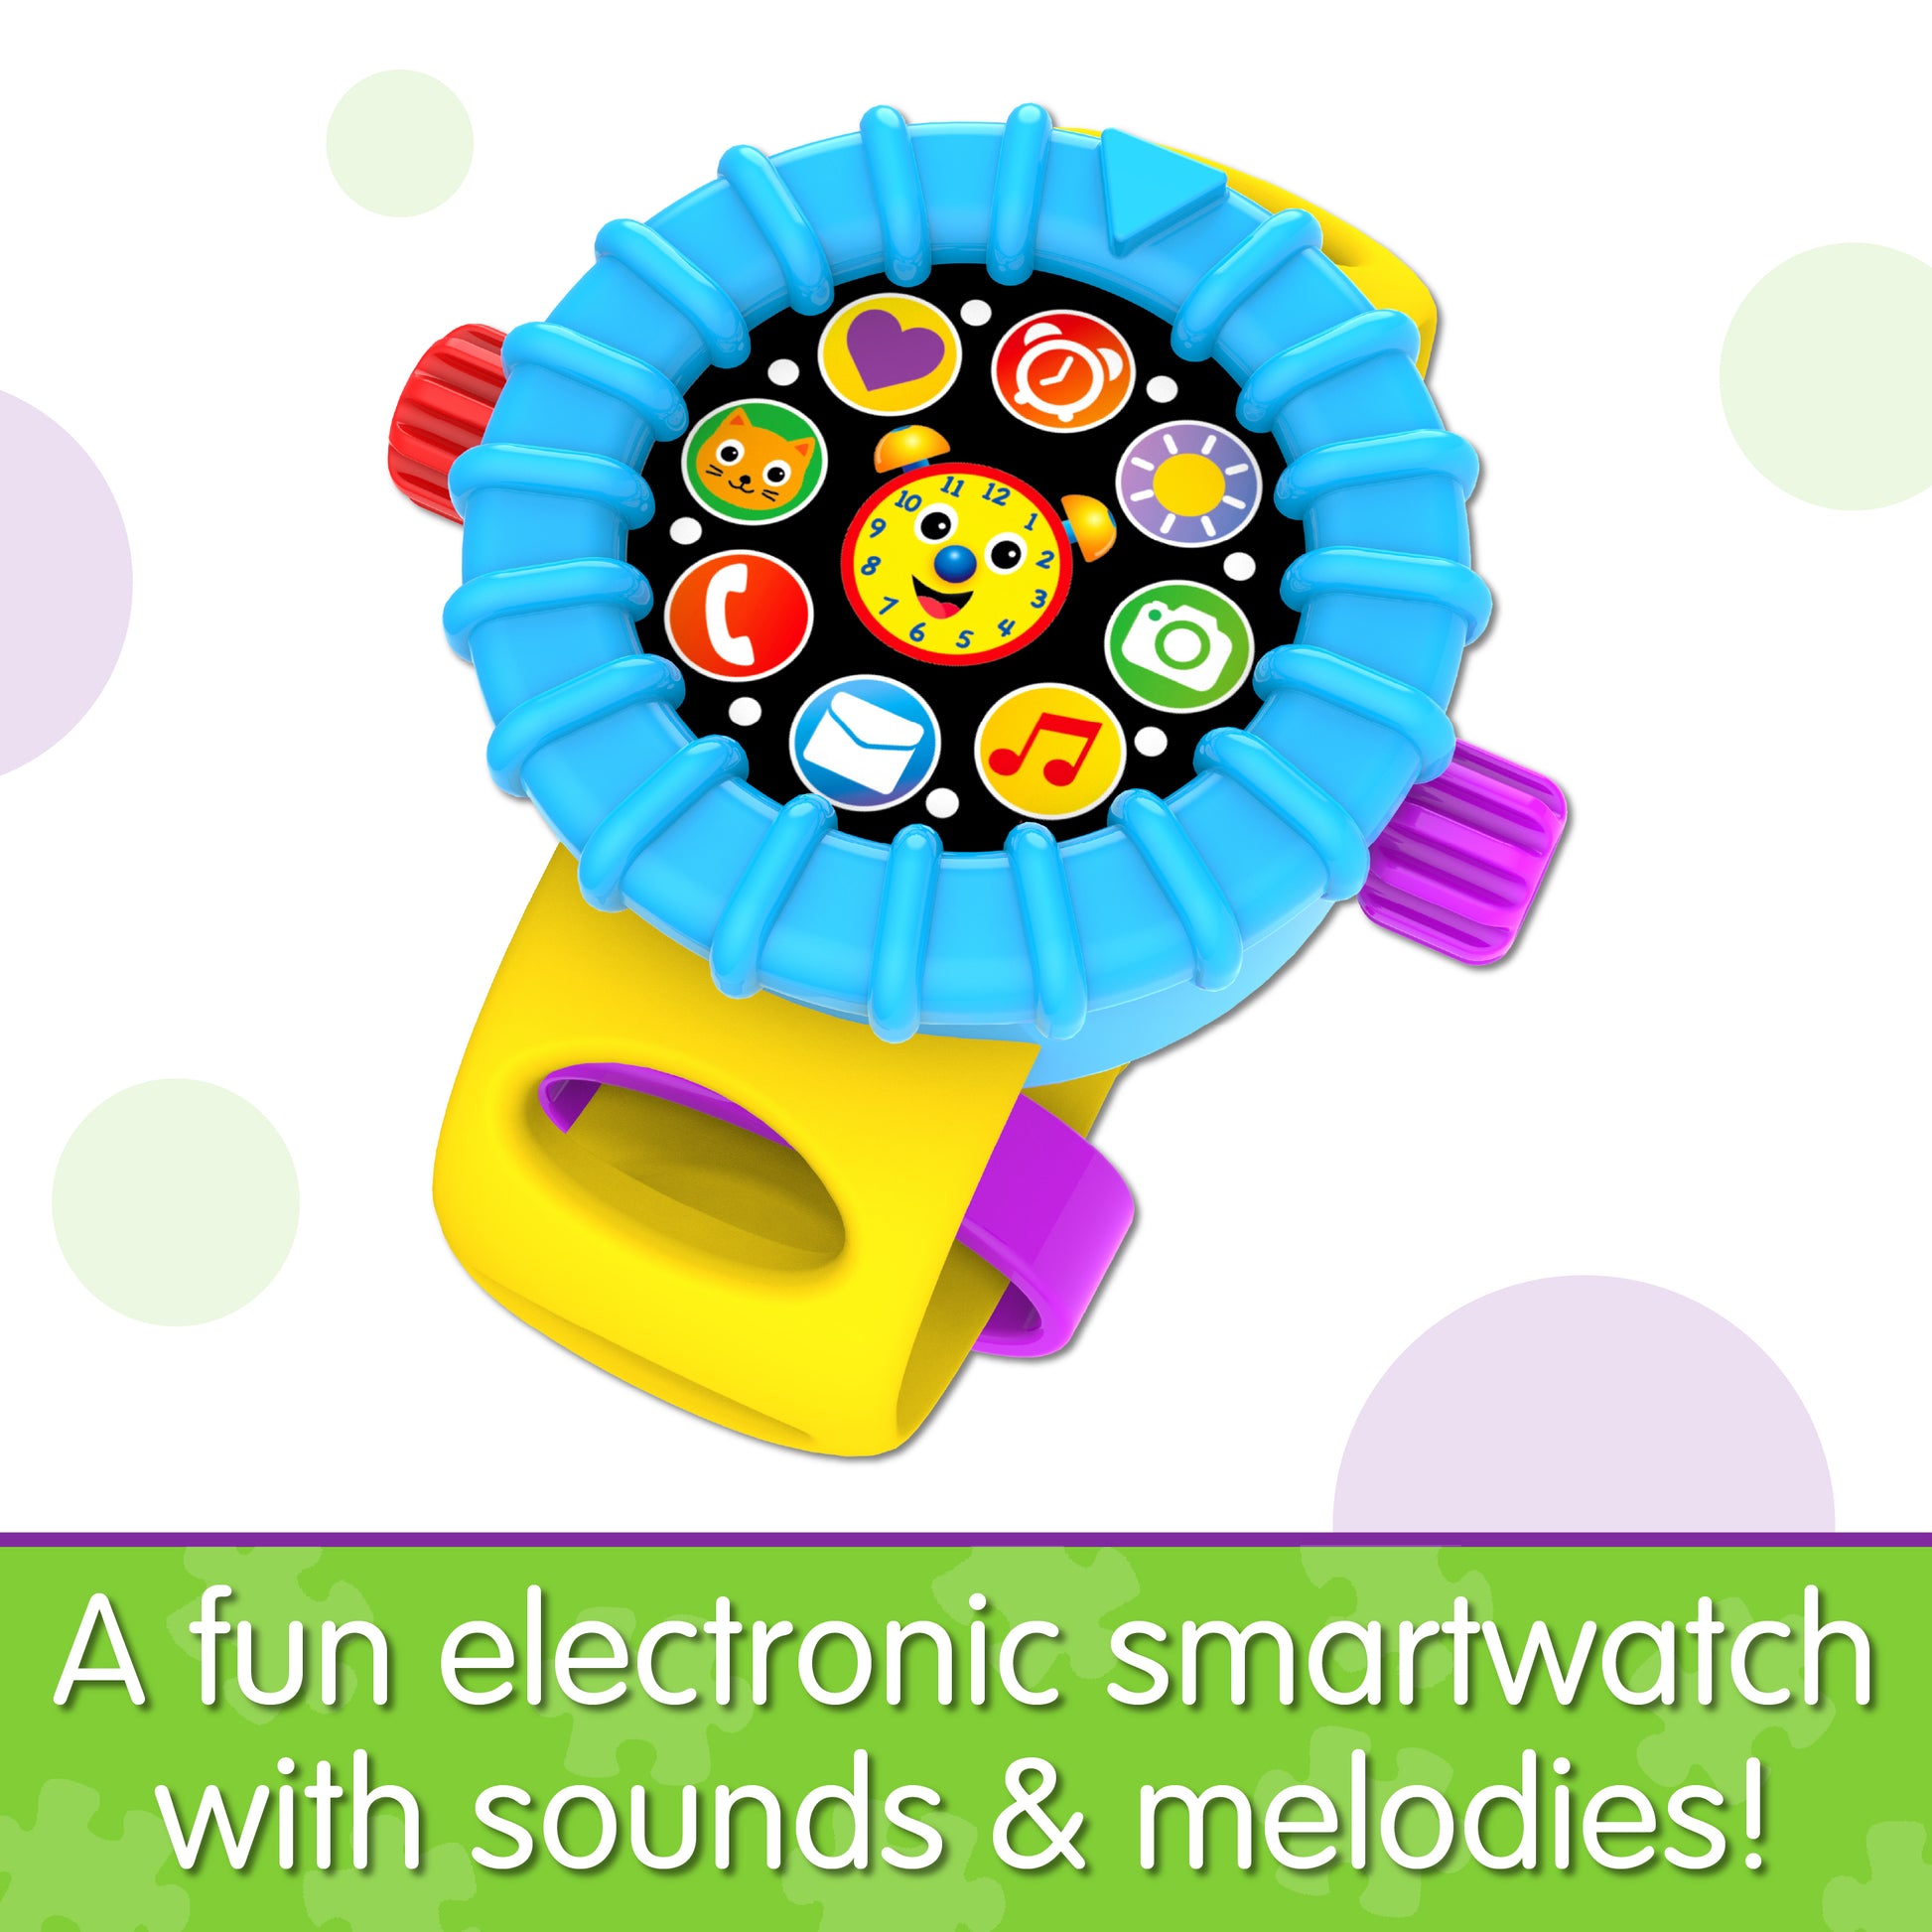 Infographic about On The Go Telly Smartwatch that says, "A fun electronic smartwatch with sounds & melodies!"